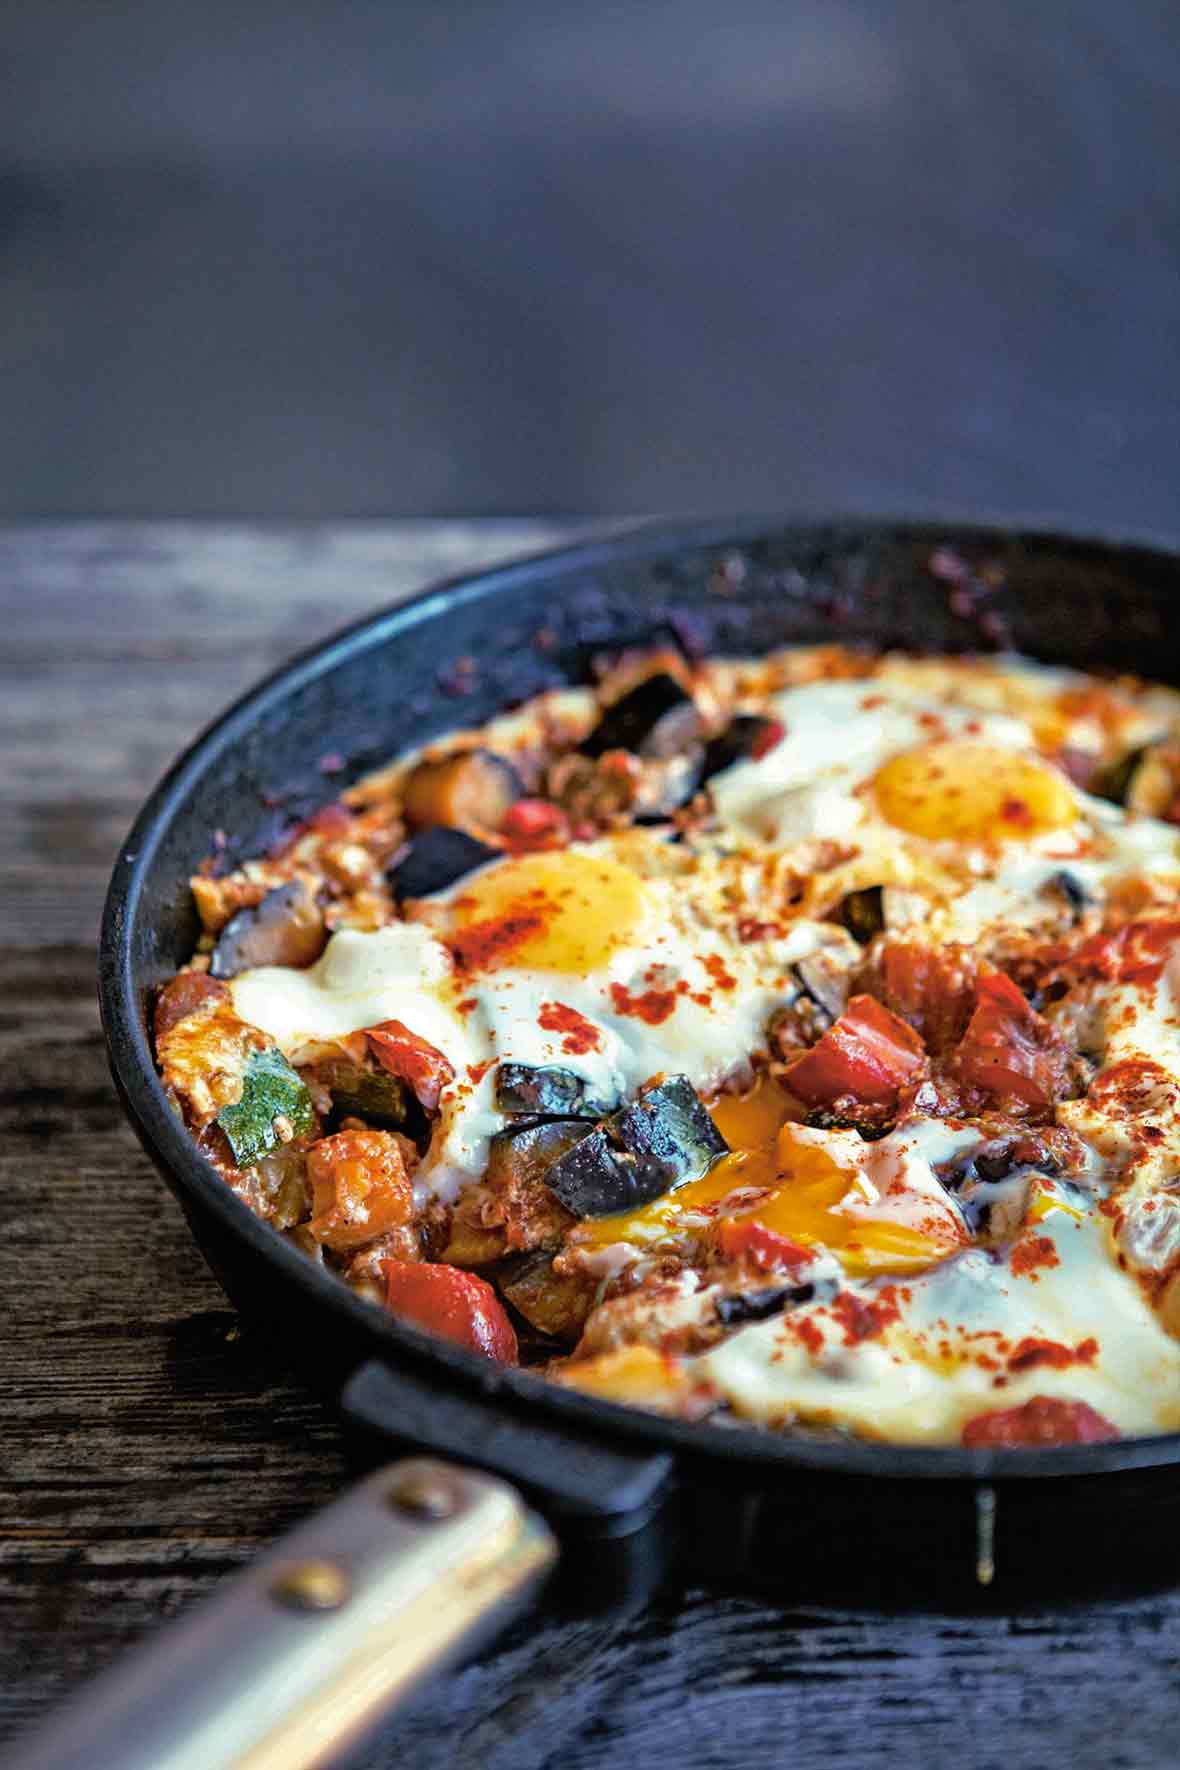 Skillet Eggs with Chorizo and Vegetables Recipe | Leite's Culinaria